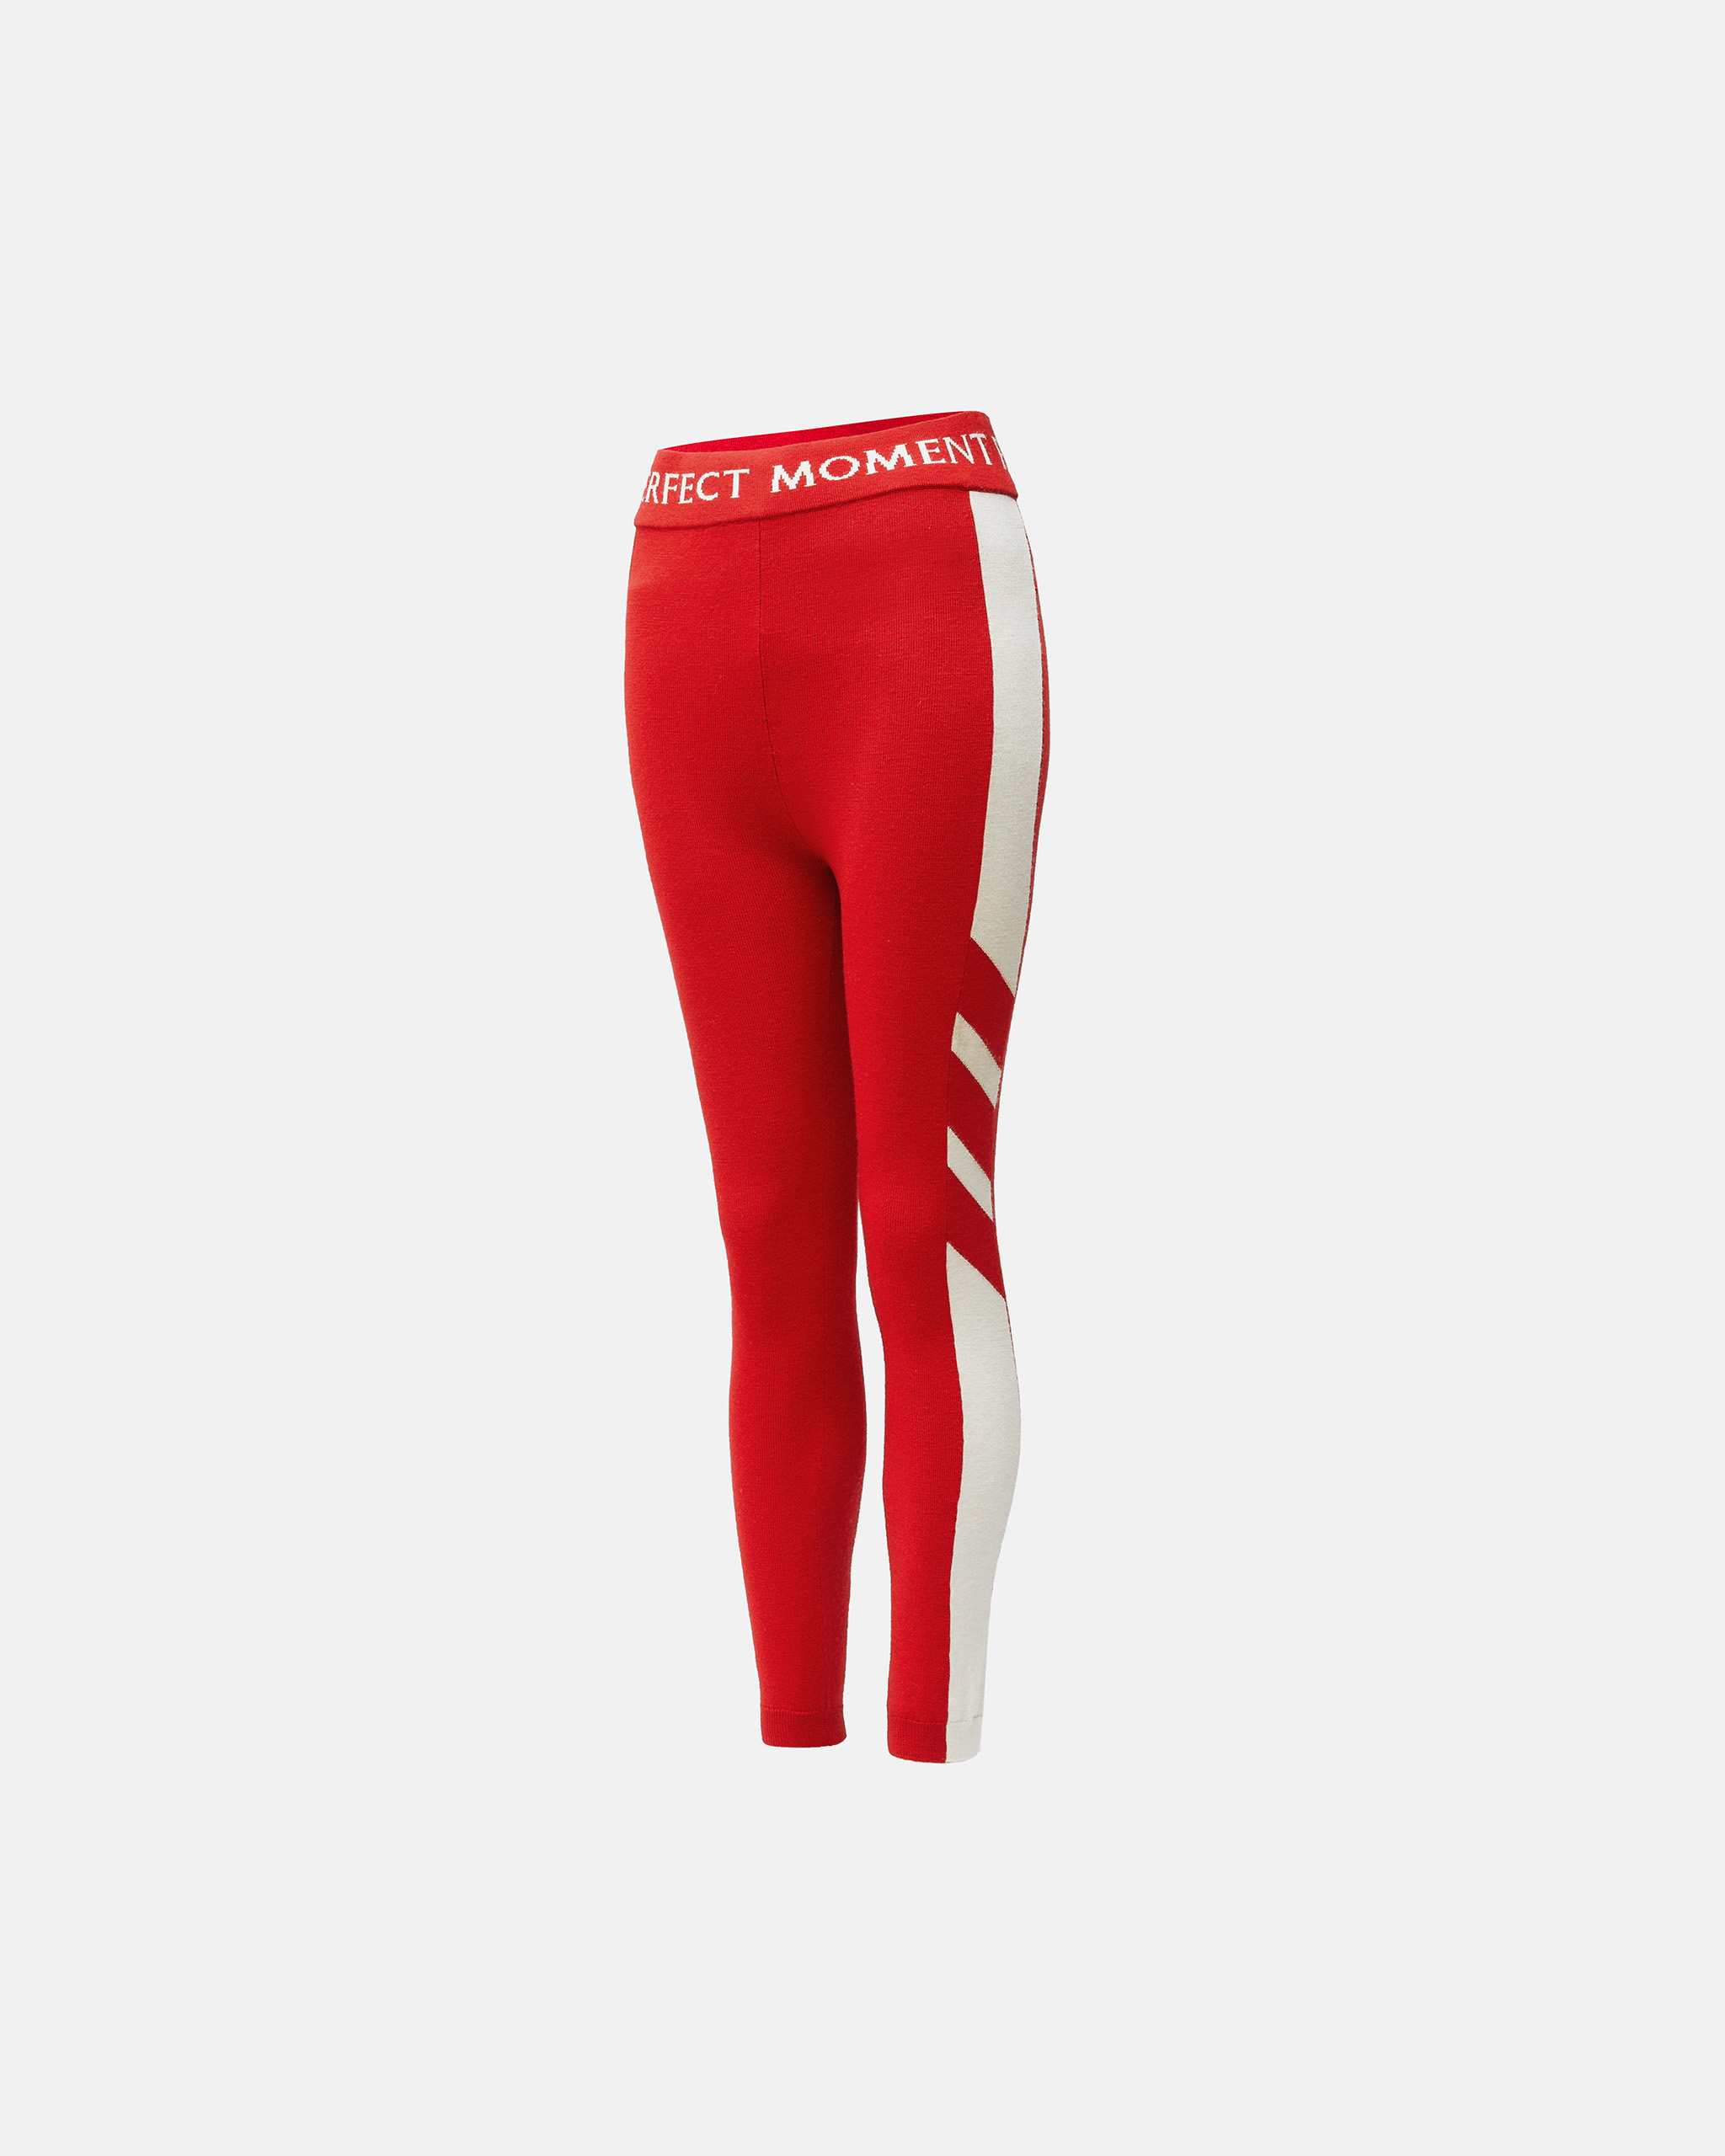 Perfect Moment Bb Merino Wool Legging In Red